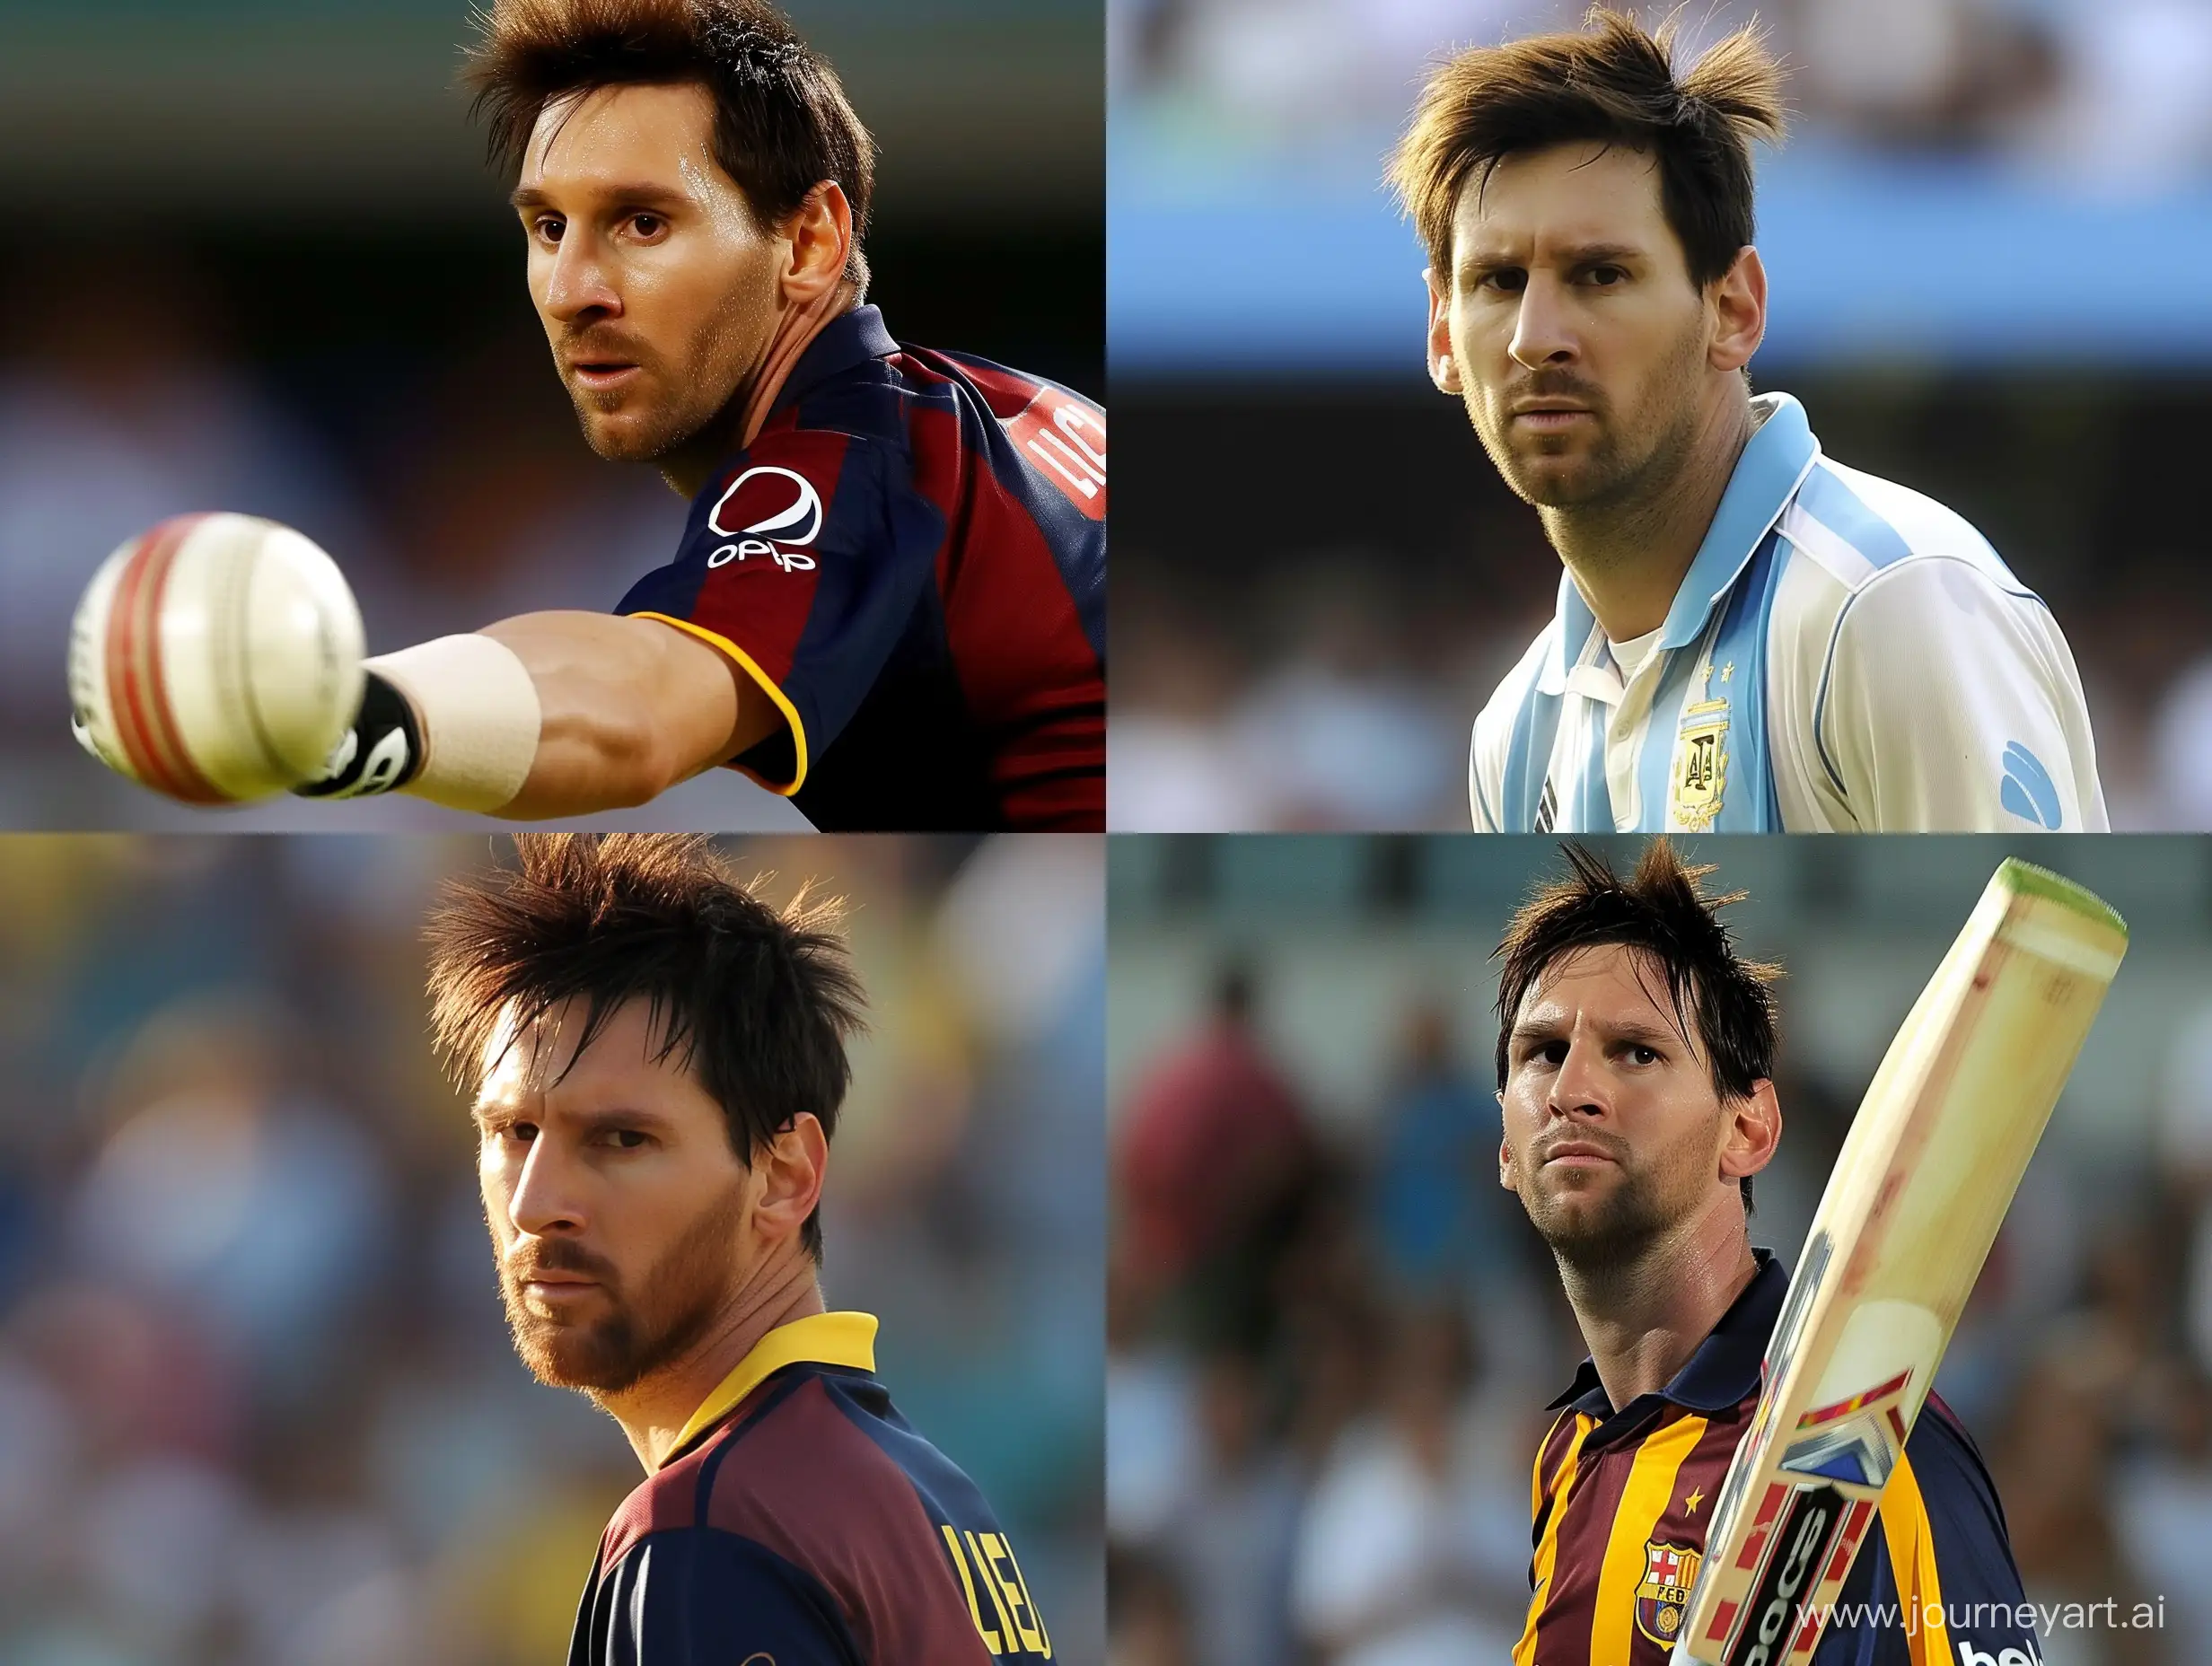 Leo-Messi-Showcases-Cricket-Skills-in-Dynamic-Action